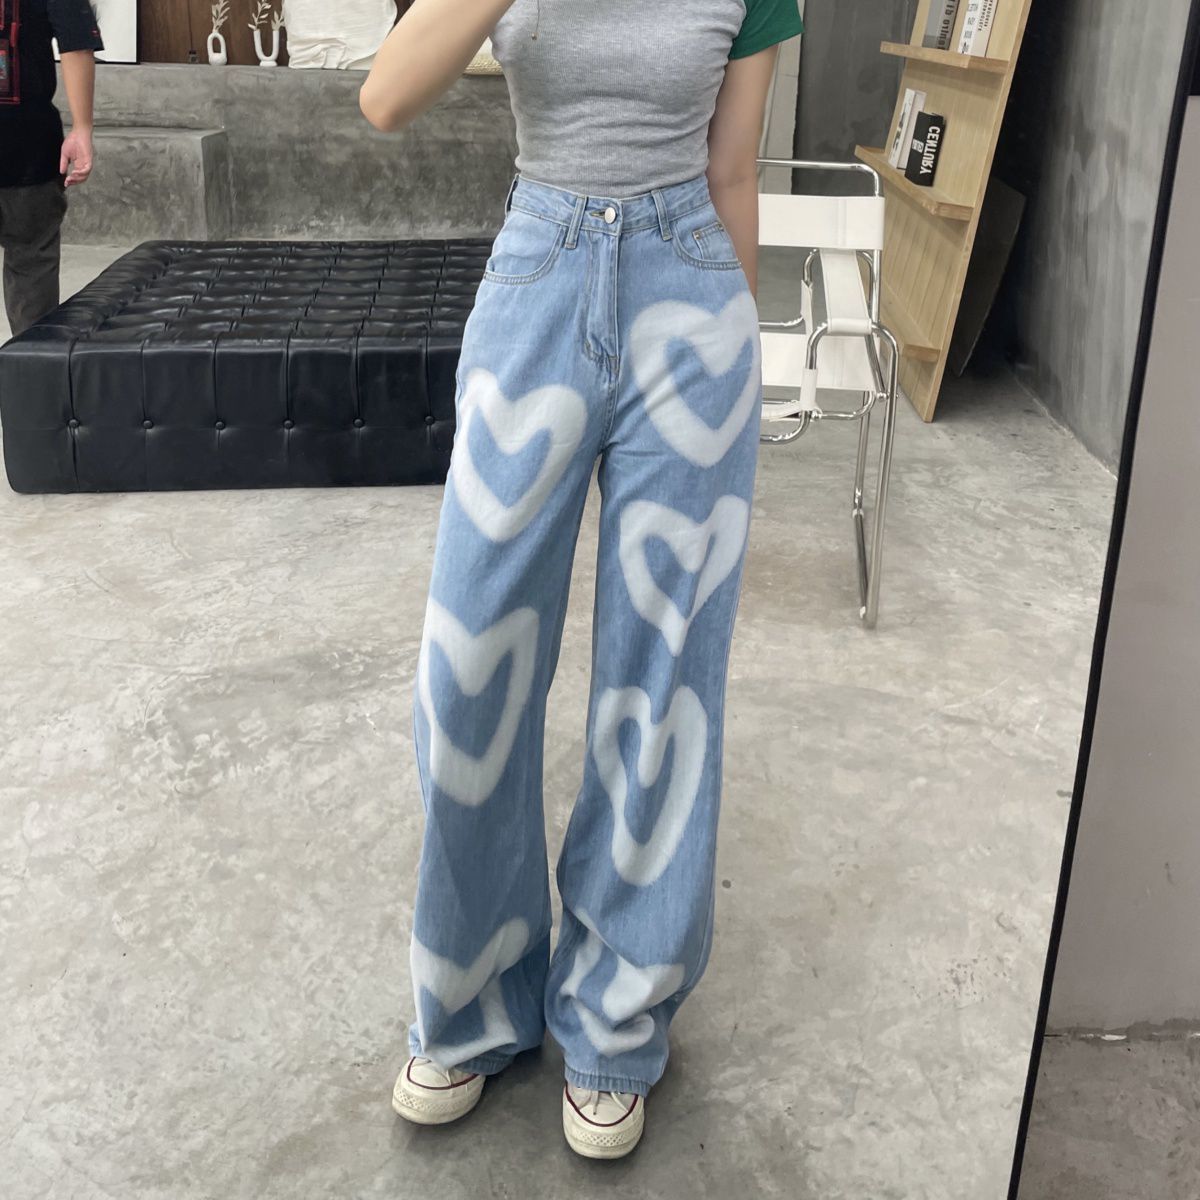 Itzy Yeji Inspired Denim Jeans With Printed Heart